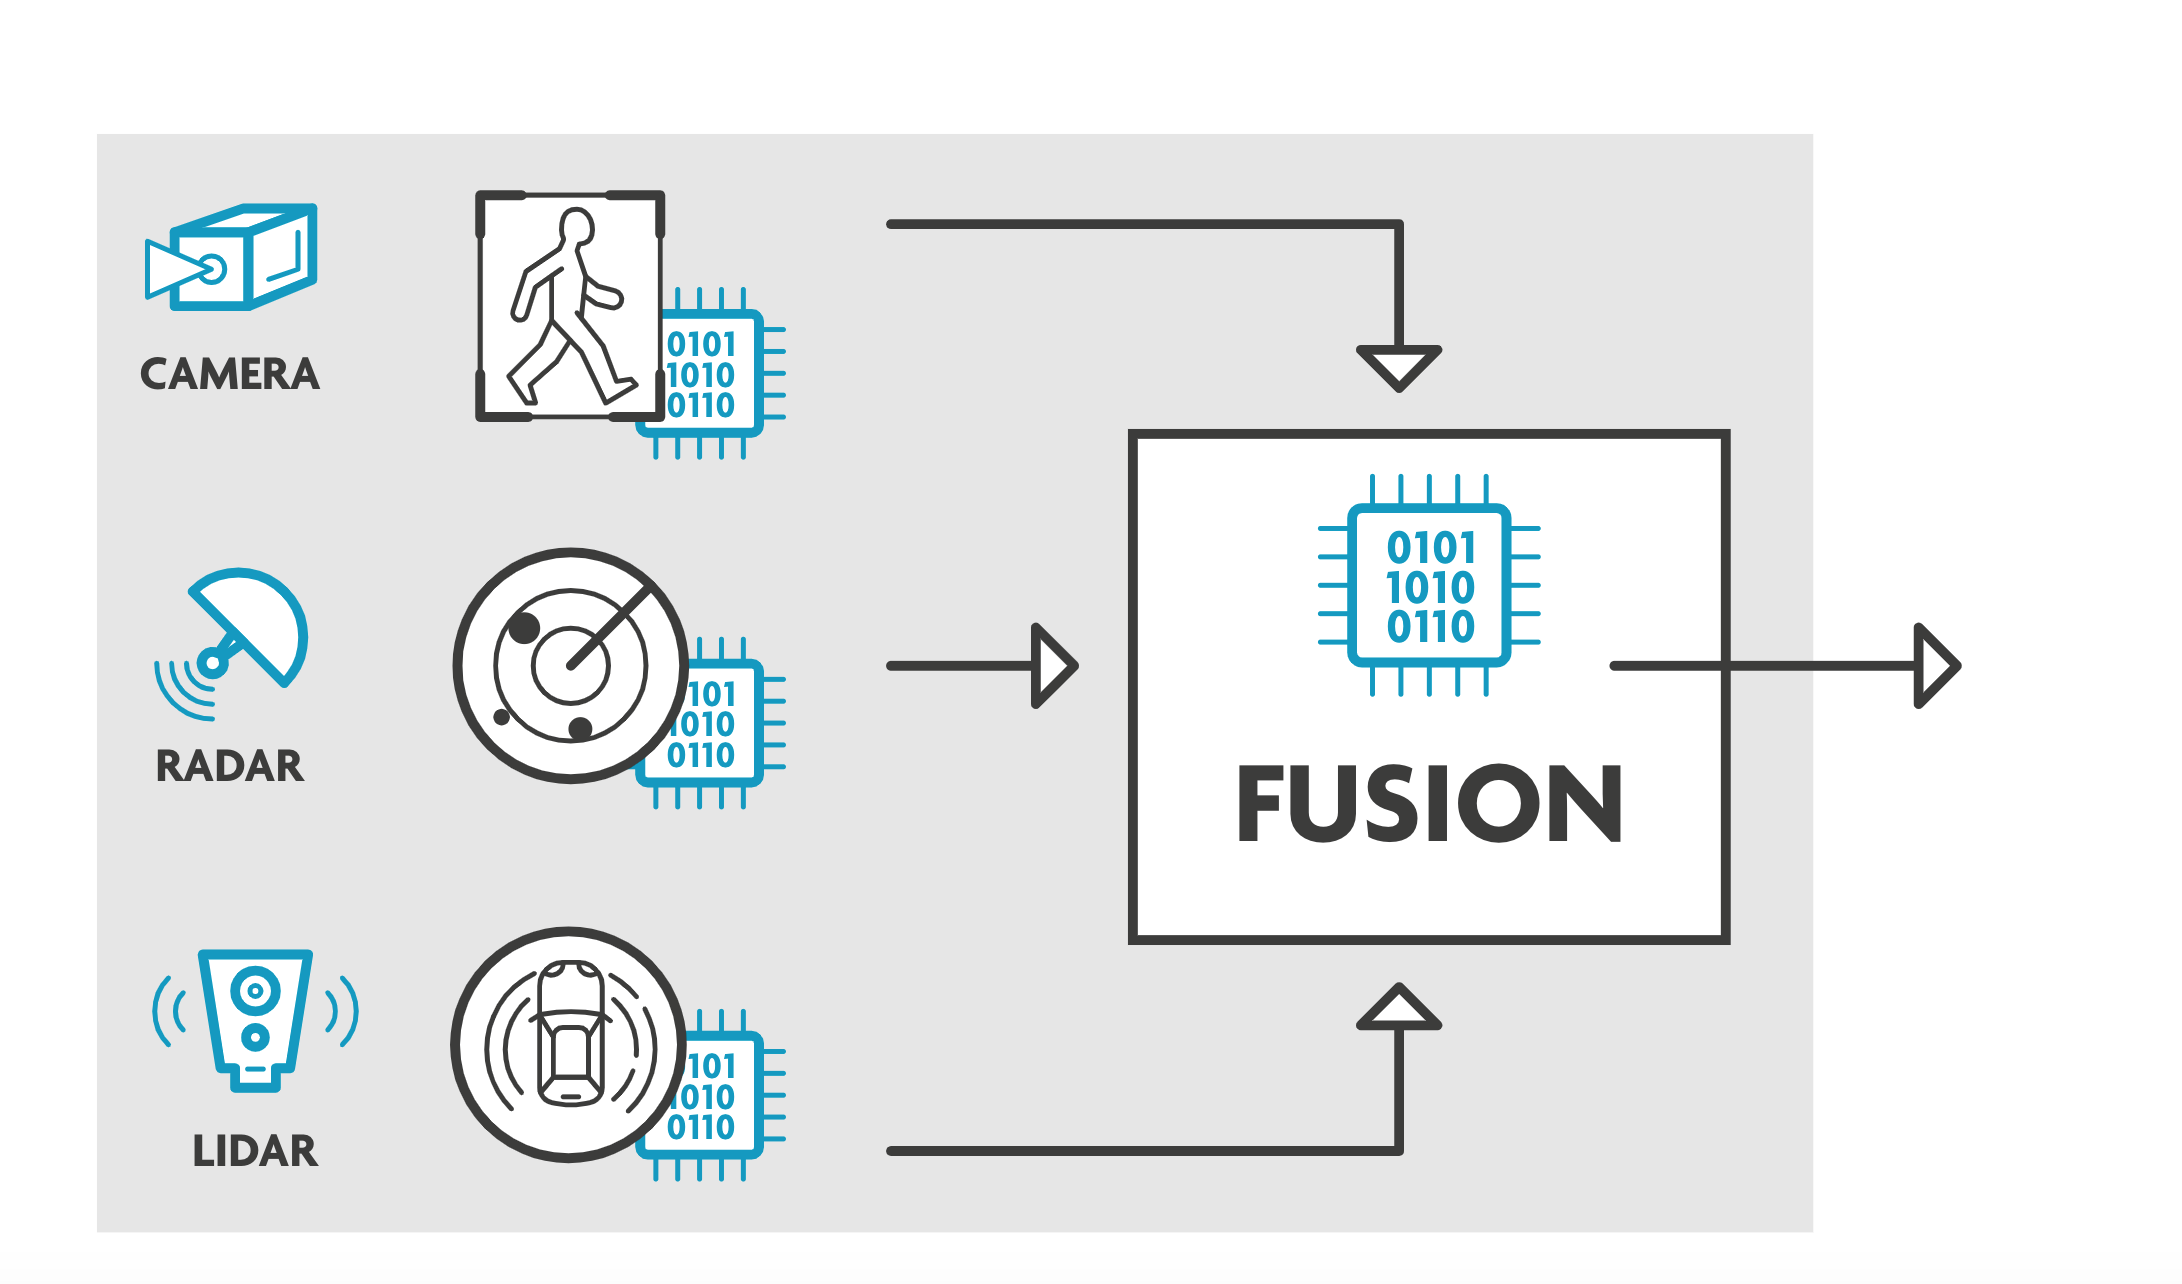 Fig 2: Early fusion builds on all low-level data from every sensor – and combines those in one intelligent system that sees everything. Source: imec.